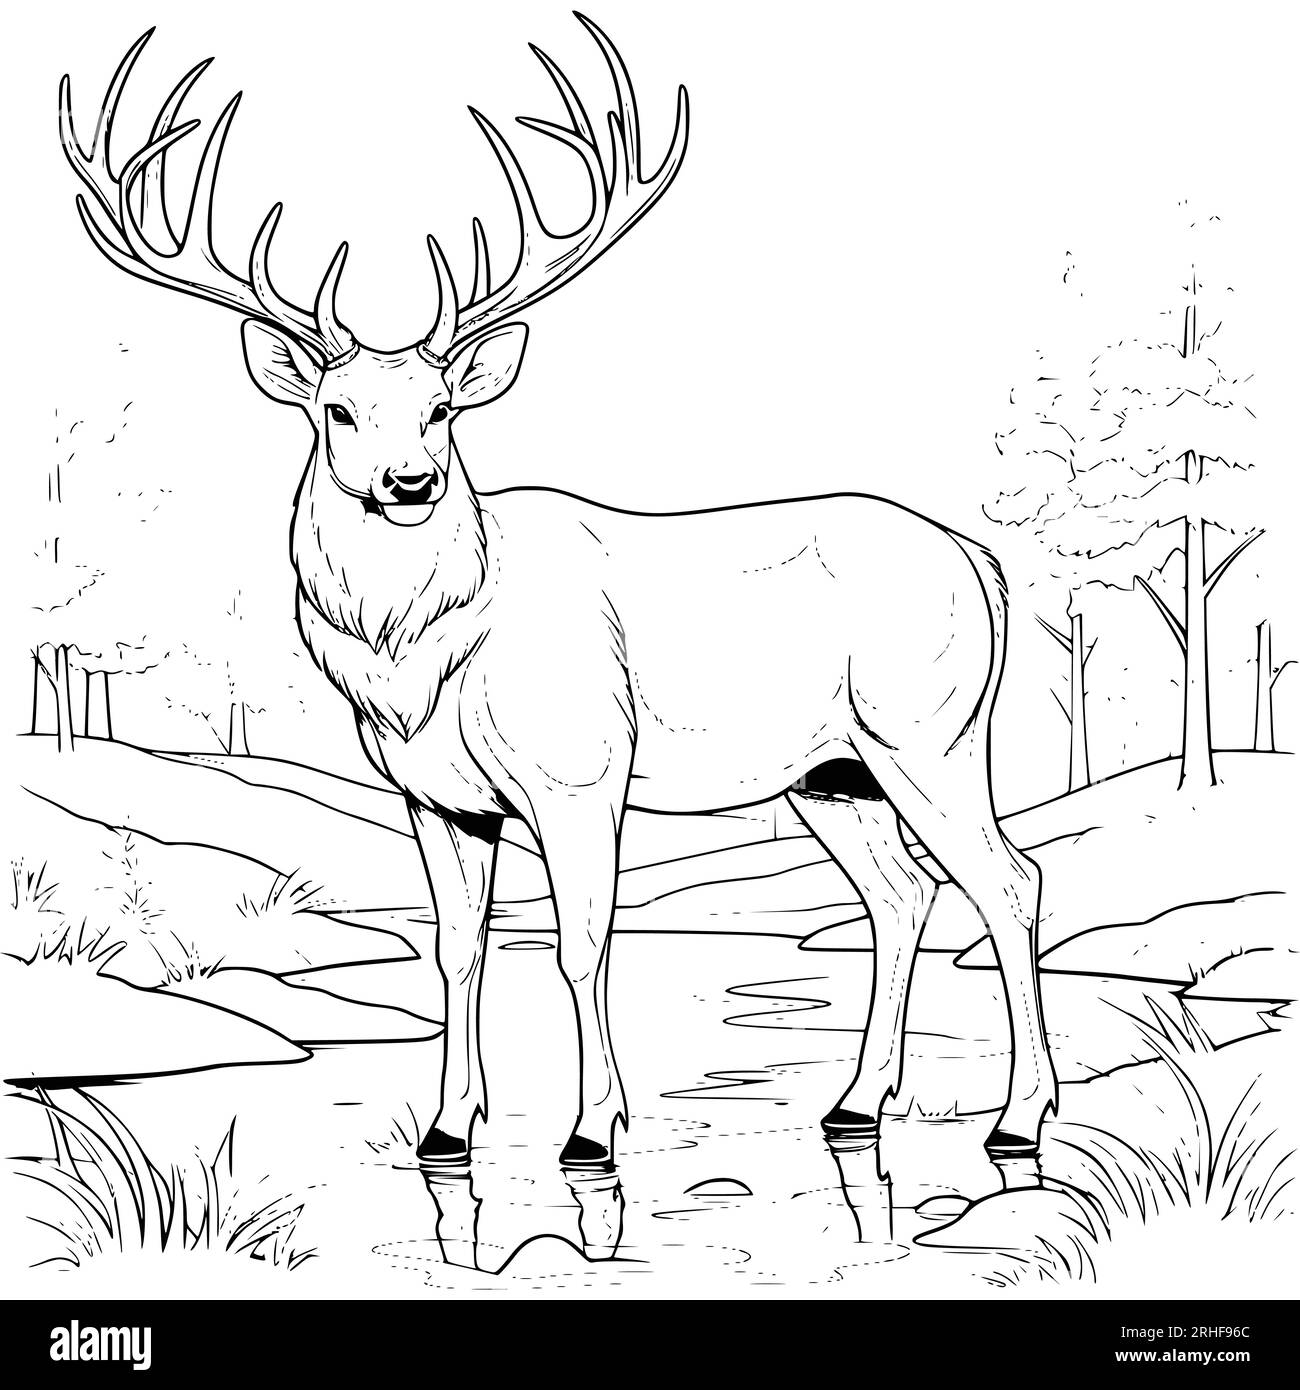 Big Deer on the River Bank Coloring Page Drawing for Kids Illustrazione Vettoriale